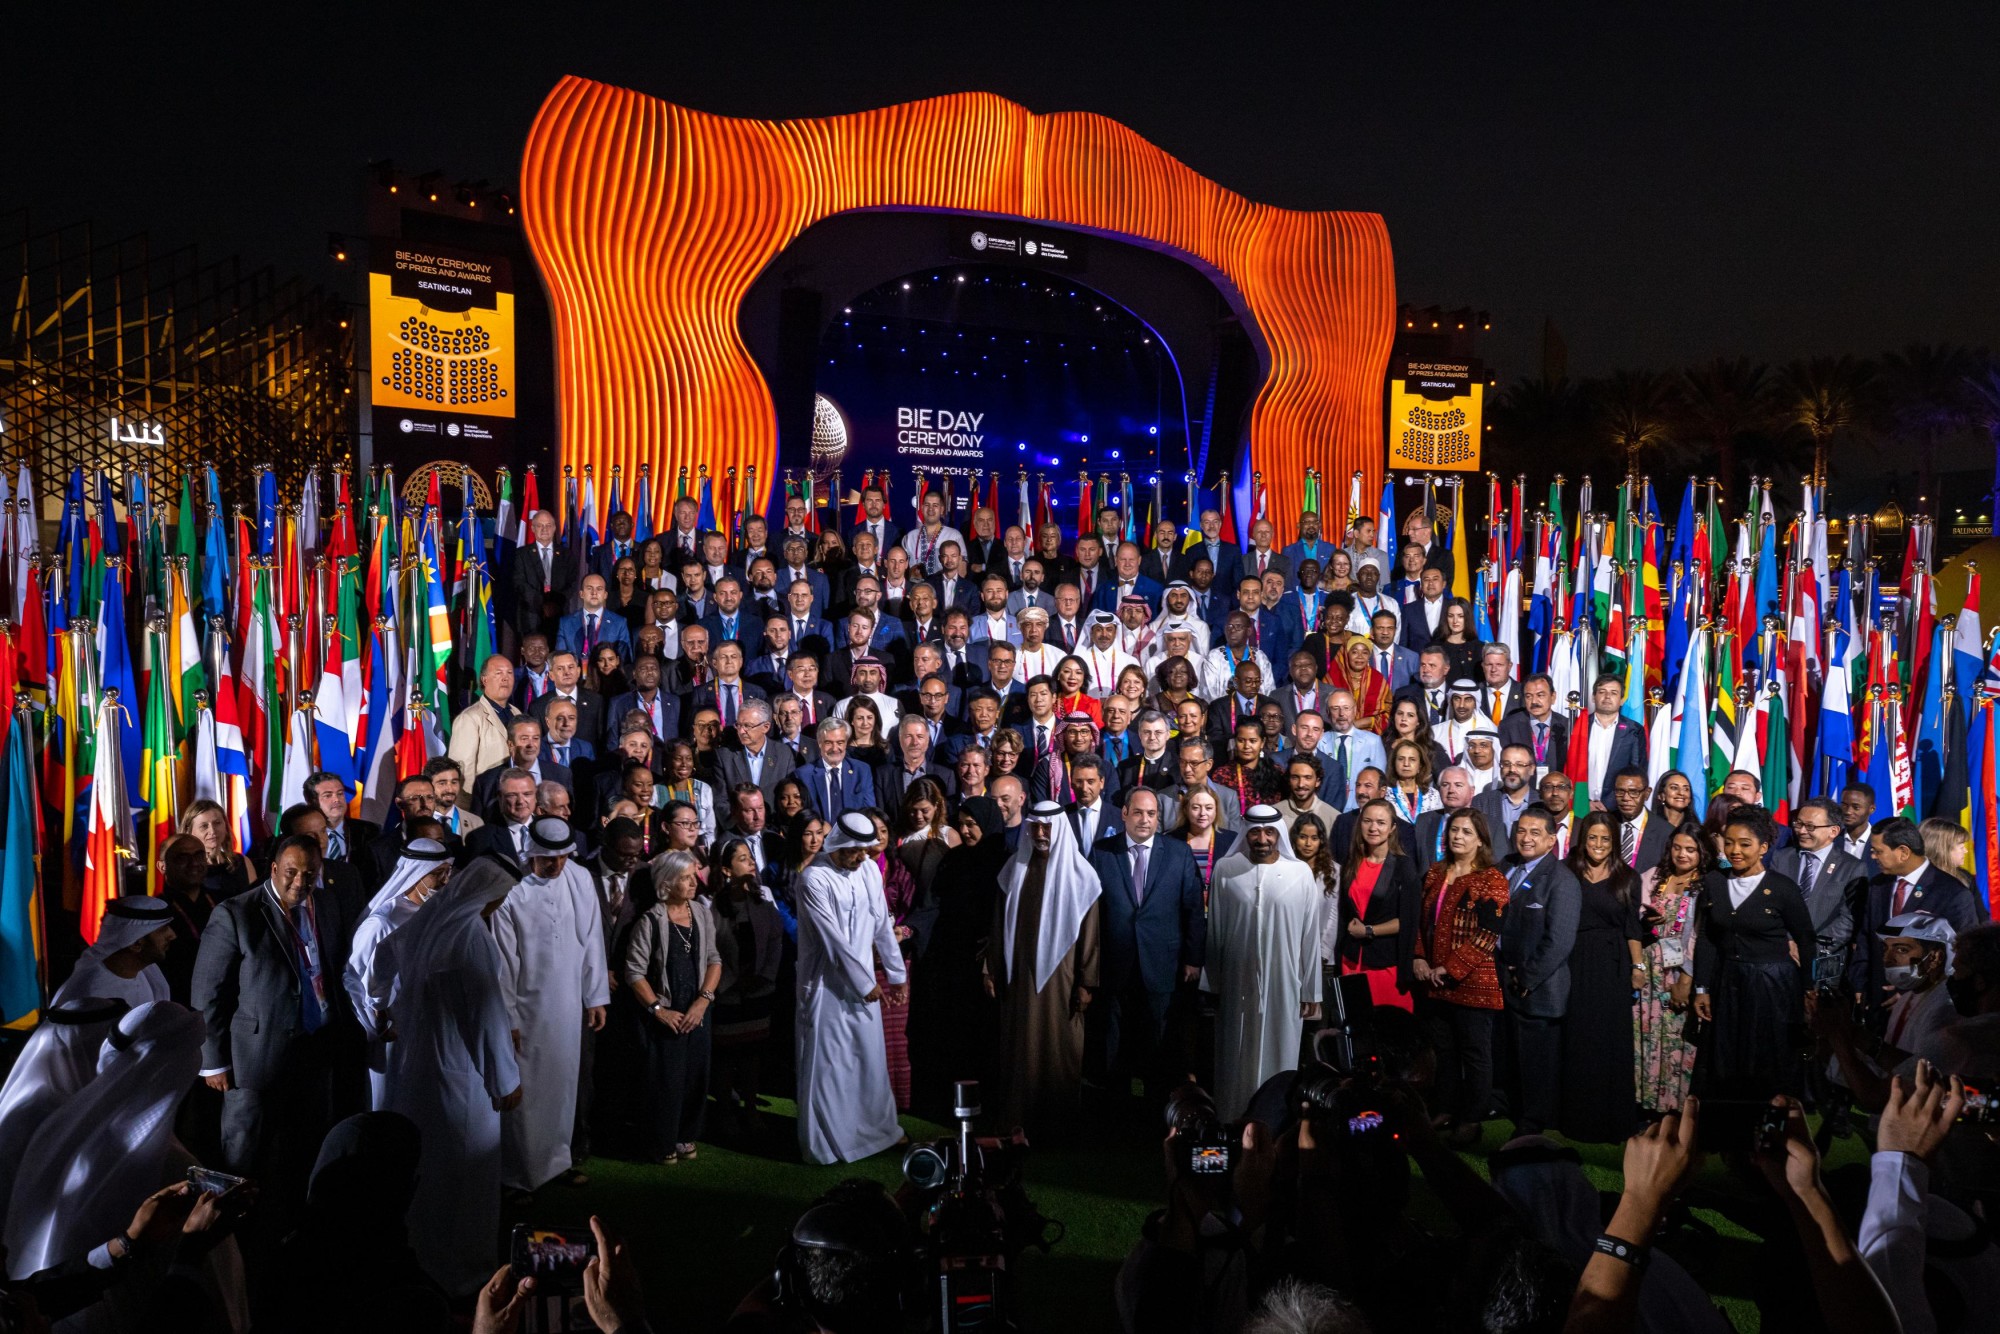 A group photo of the Commissioners Generals of Expo 2020 Pavilions with Her Excellency Reem Al Hashimy, UAE Minister of State for International Cooperation and Director General, Expo 2020 Dubai, His Excellency Dimitri Kerkentzes, Secretary G